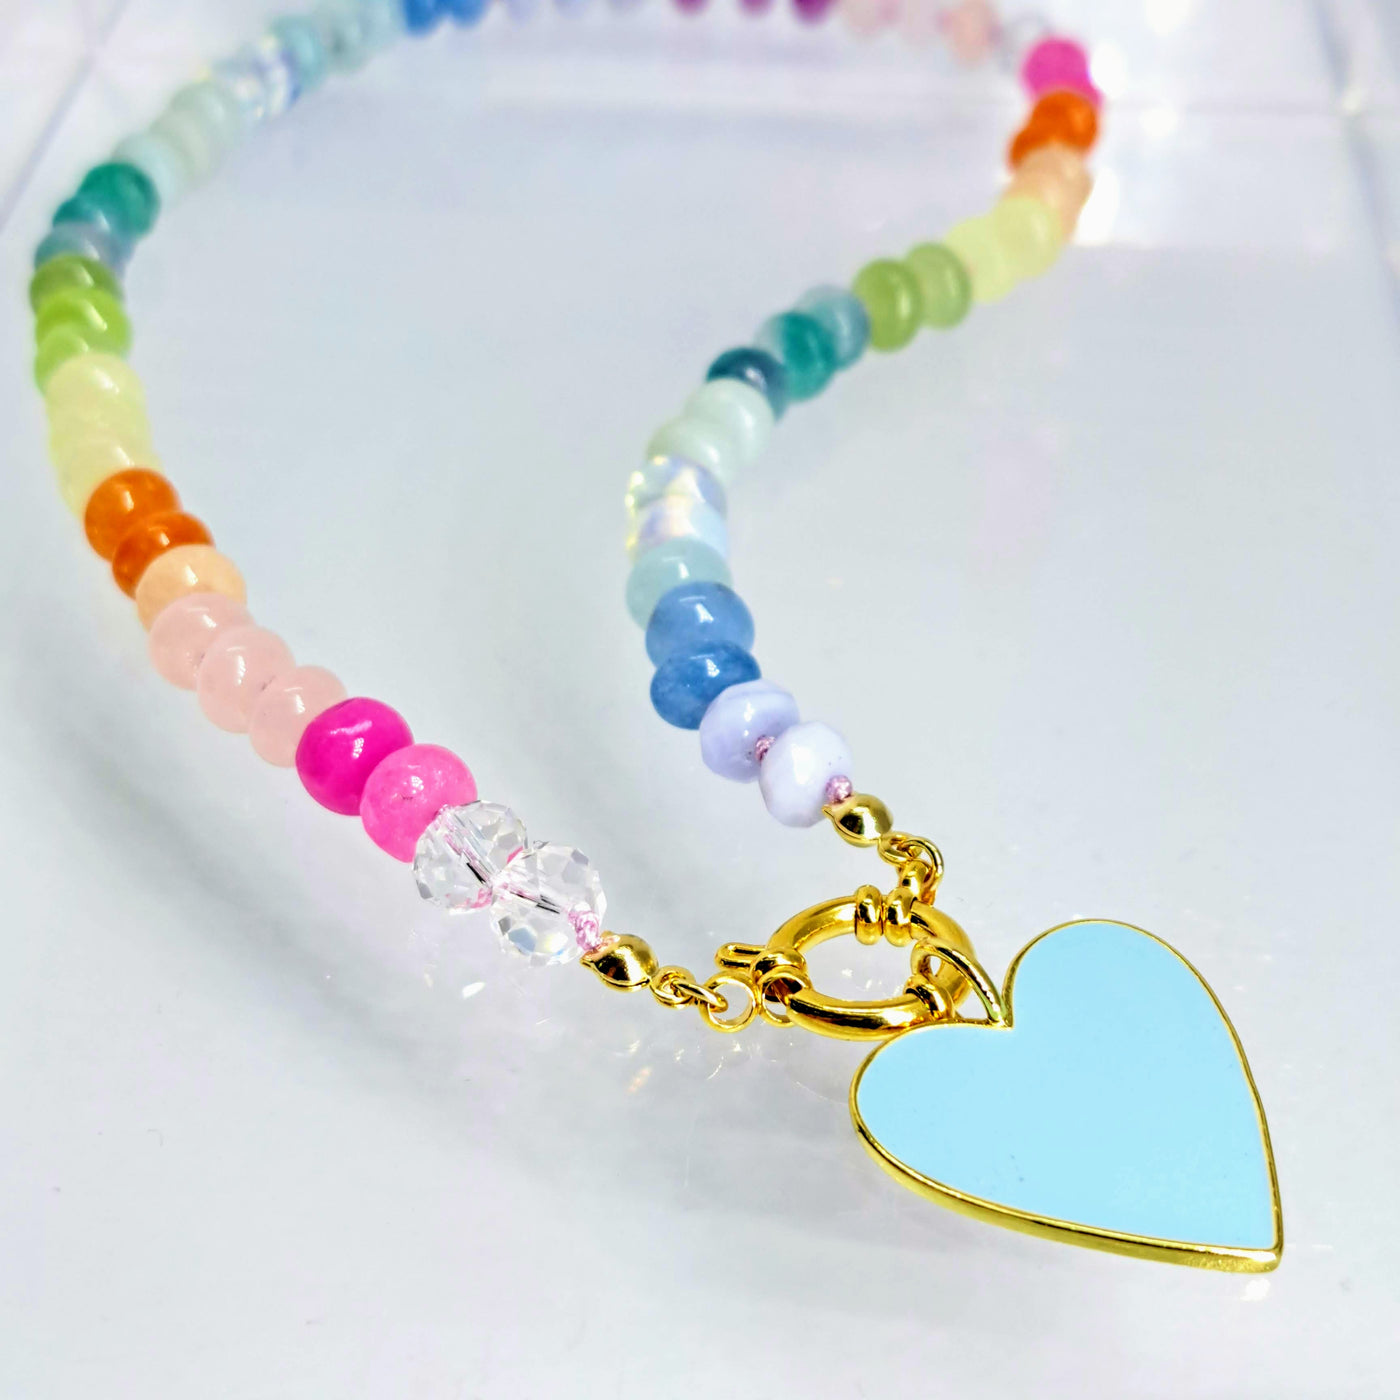 "Rainbow LOVE!" 16" & 18" Necklaces - Mixed Gemstones, Gold Filled Charm Catcher Clasp, Enamel Charm